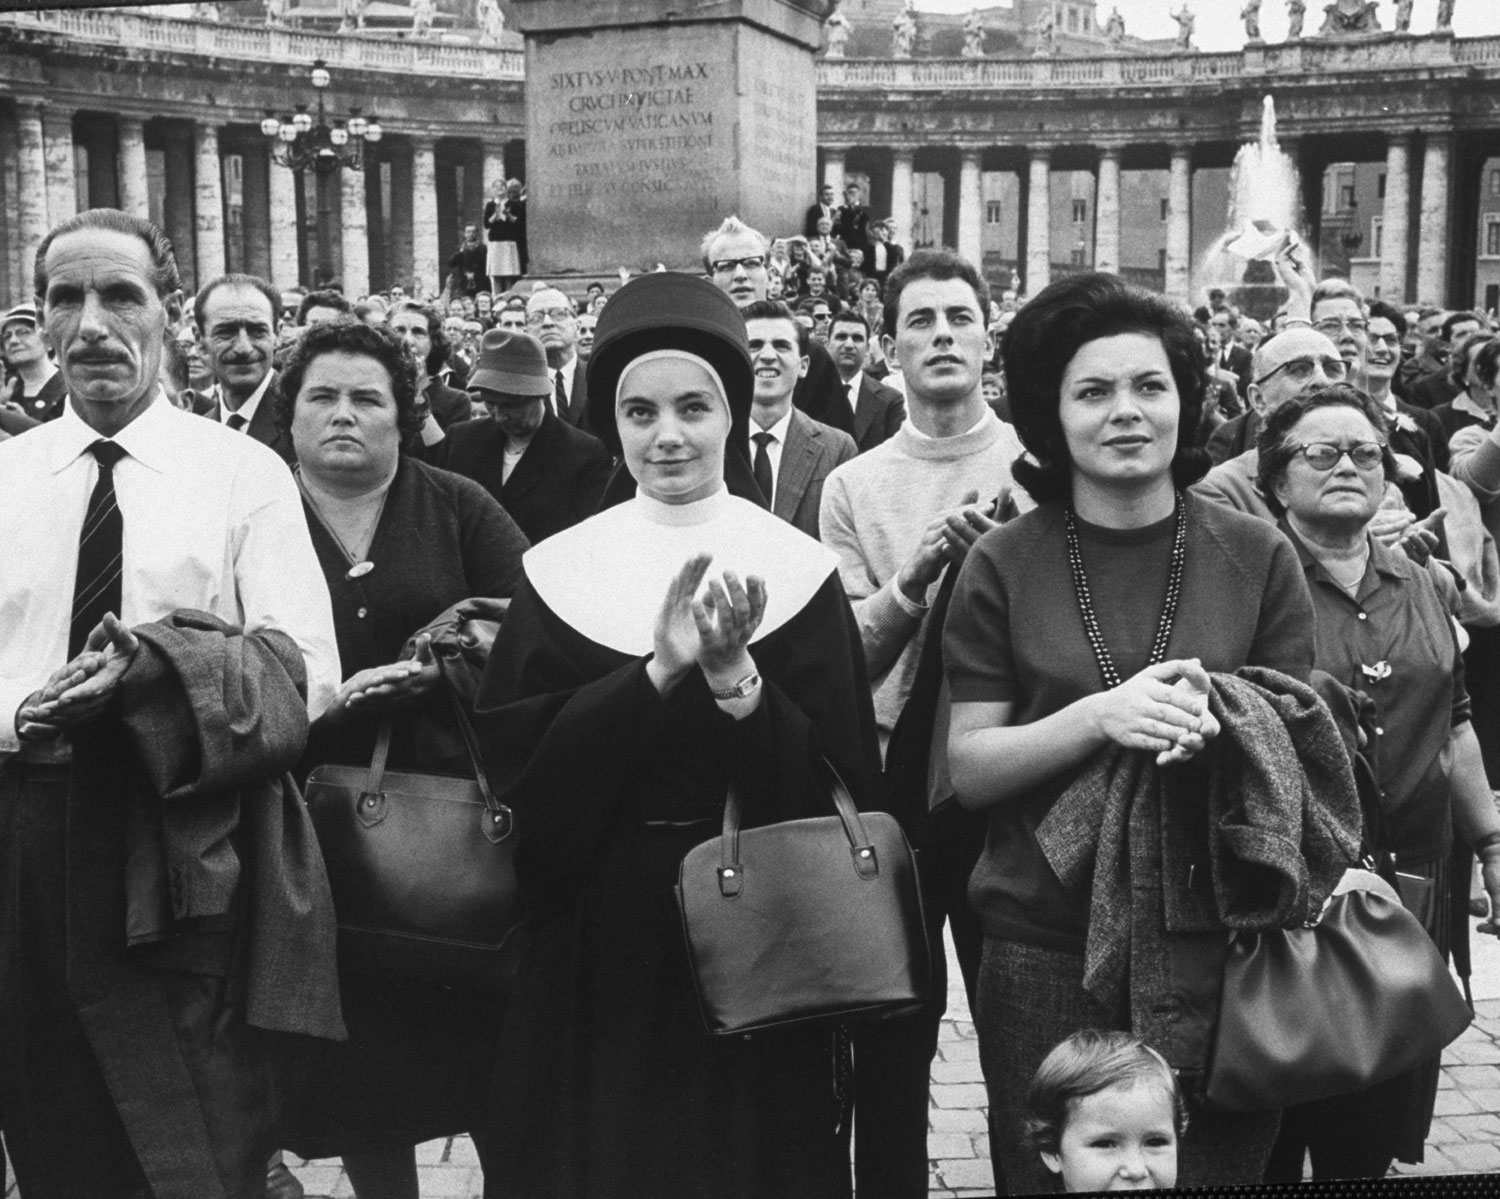 Devout observers of procession of Catholic prelates entering St. Peter's during the Second Vatican Ecumenical Council, 1962.